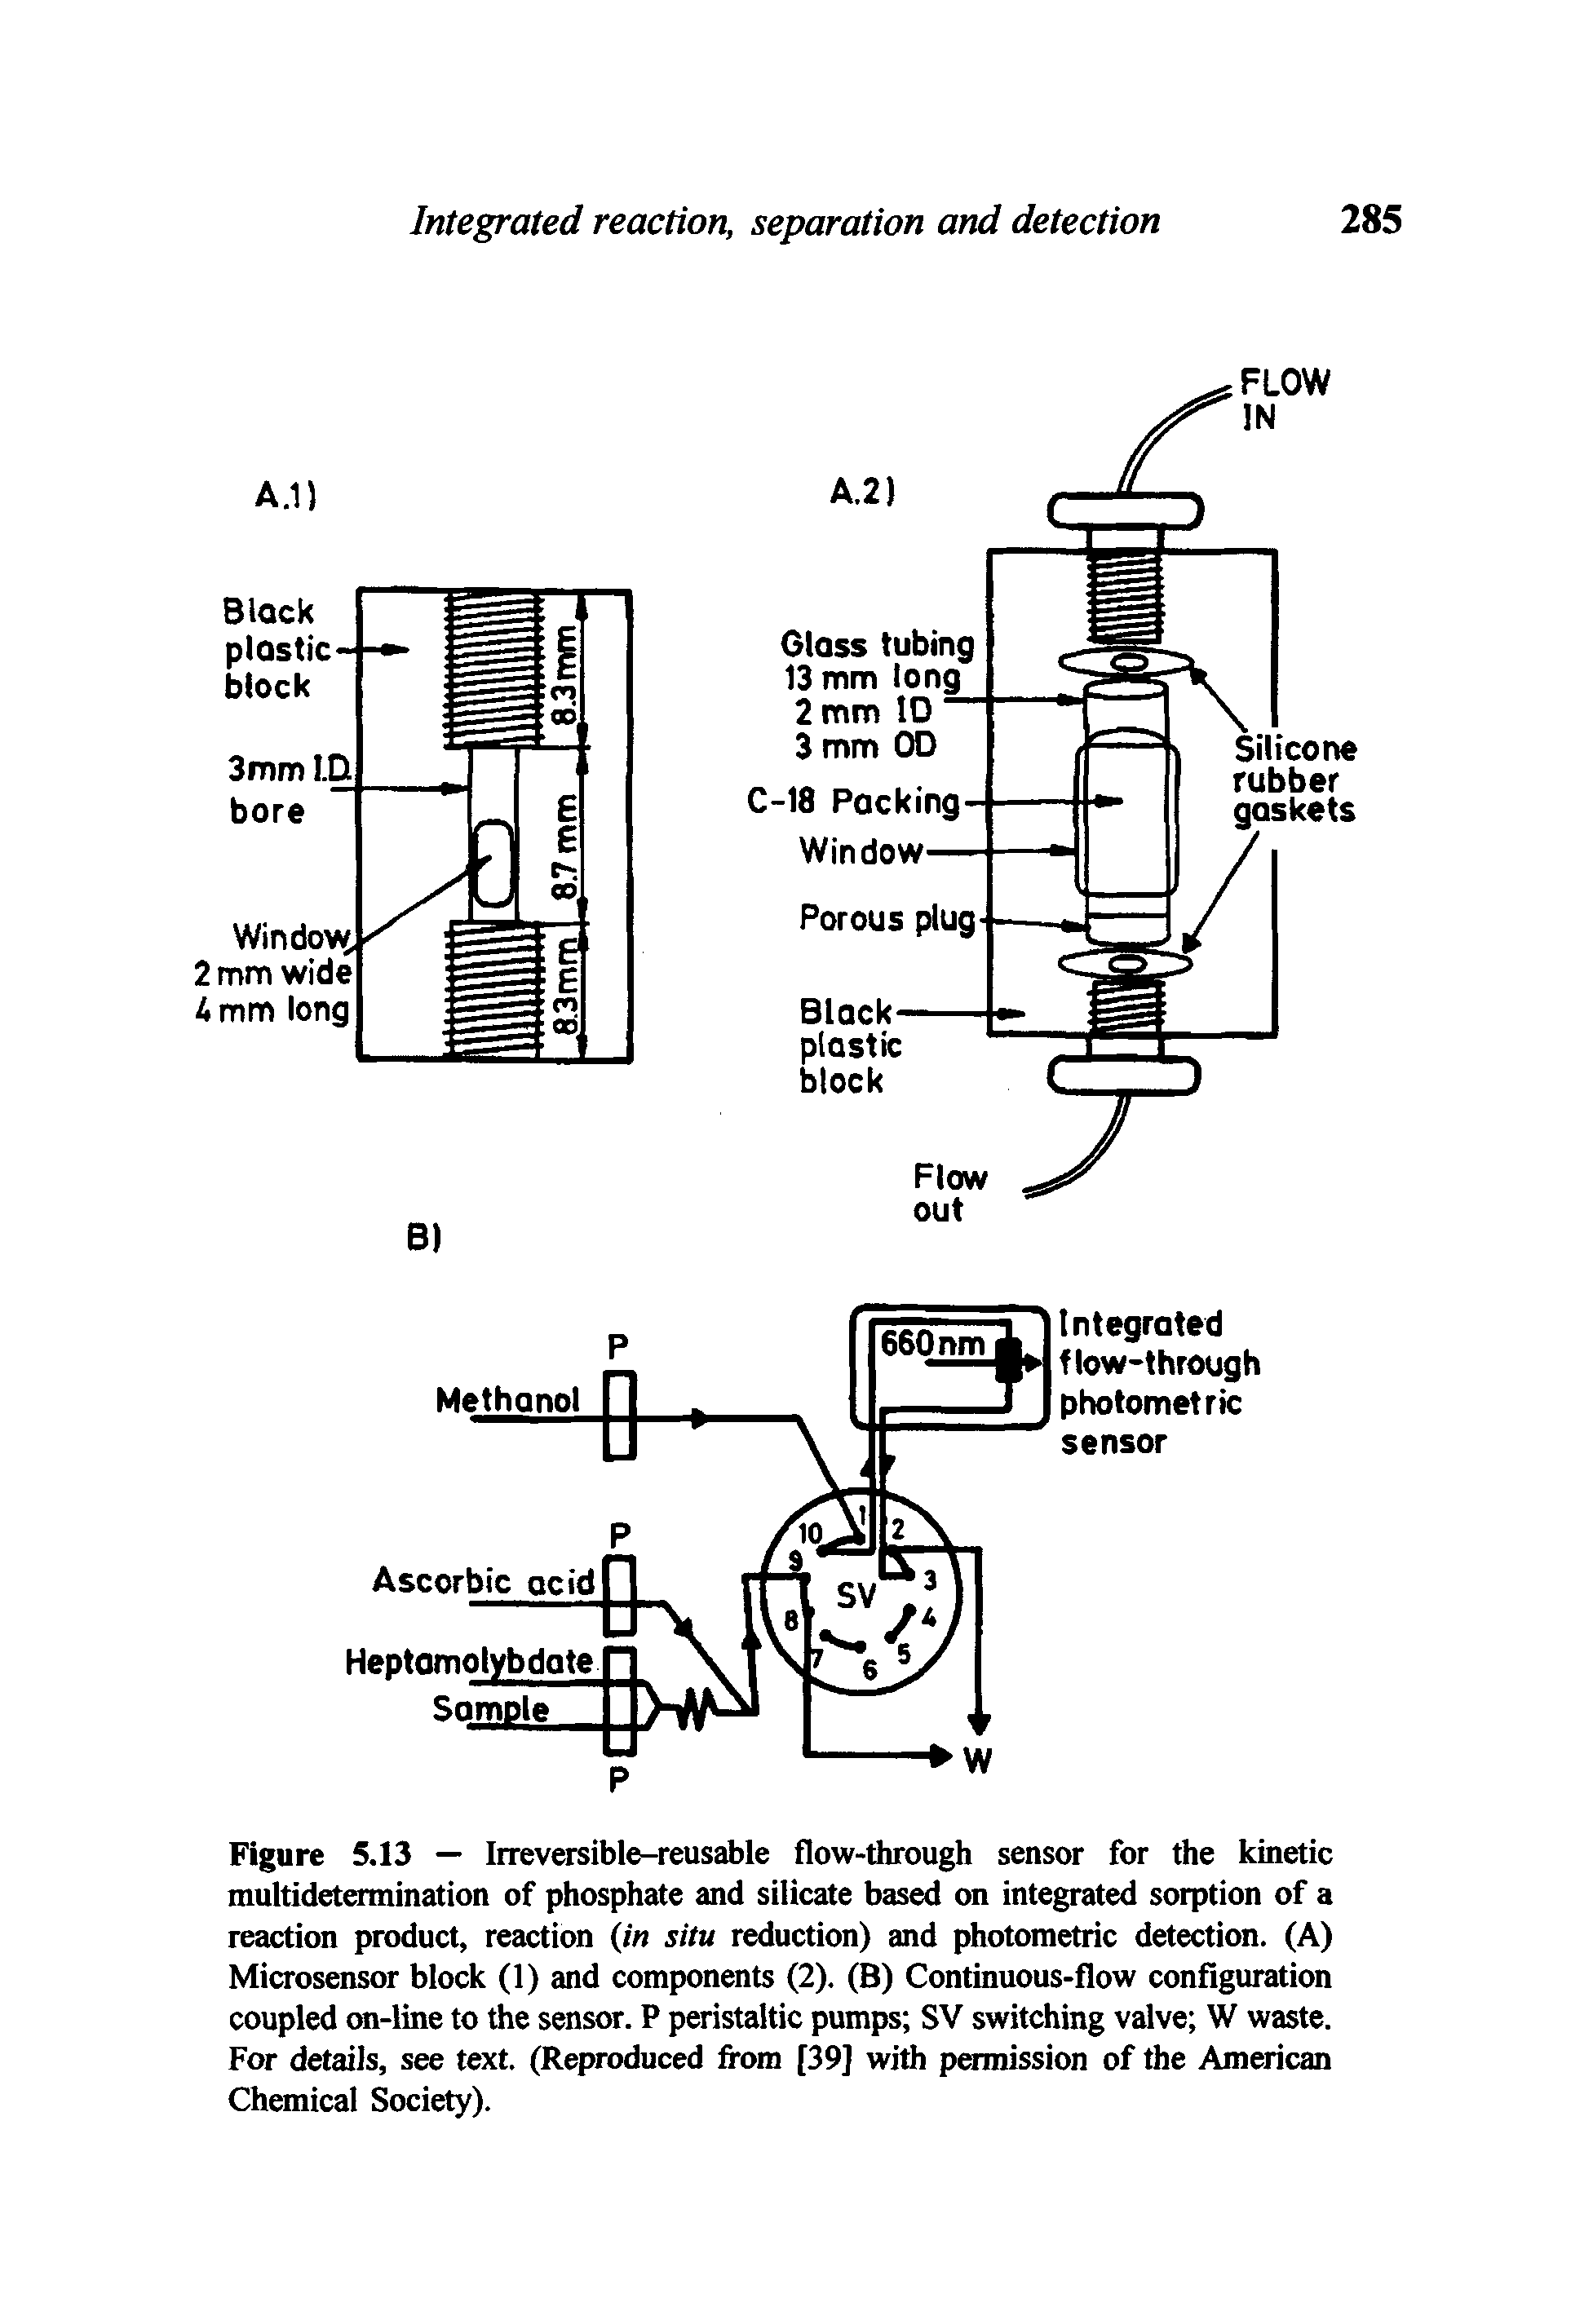 Figure 5.13 — Irreversible-reusable flow-through sensor for the kinetic multidetermination of phosphate and silicate based on integrated sorption of a reaction product, reaction (/ situ reduction) and photometric detection. (A) Microsensor block (1) and components (2). (B) Continuous-flow configuration coupled on-line to the sensor. P peristaltic pumps SV switching valve W waste. For details, see text. (Reproduced from [39] with permission of the American Chemical Society).